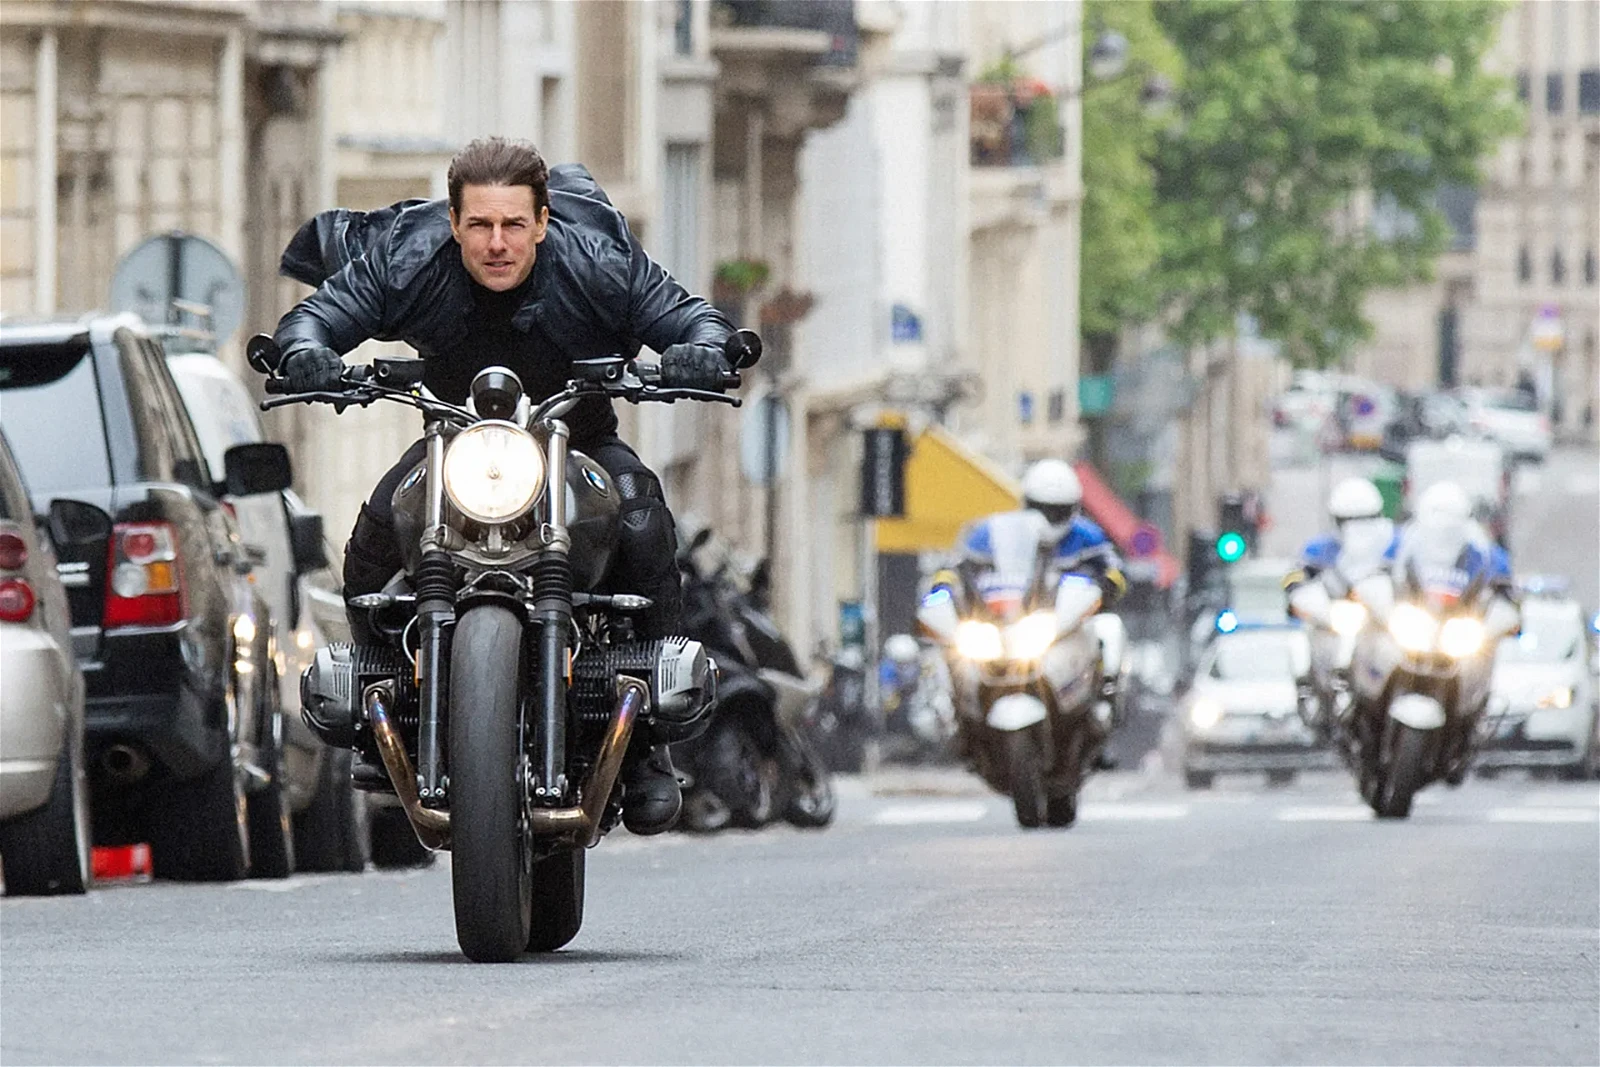 Tom Cruise as Agent Ethan Hunt in Mission Impossible franchise